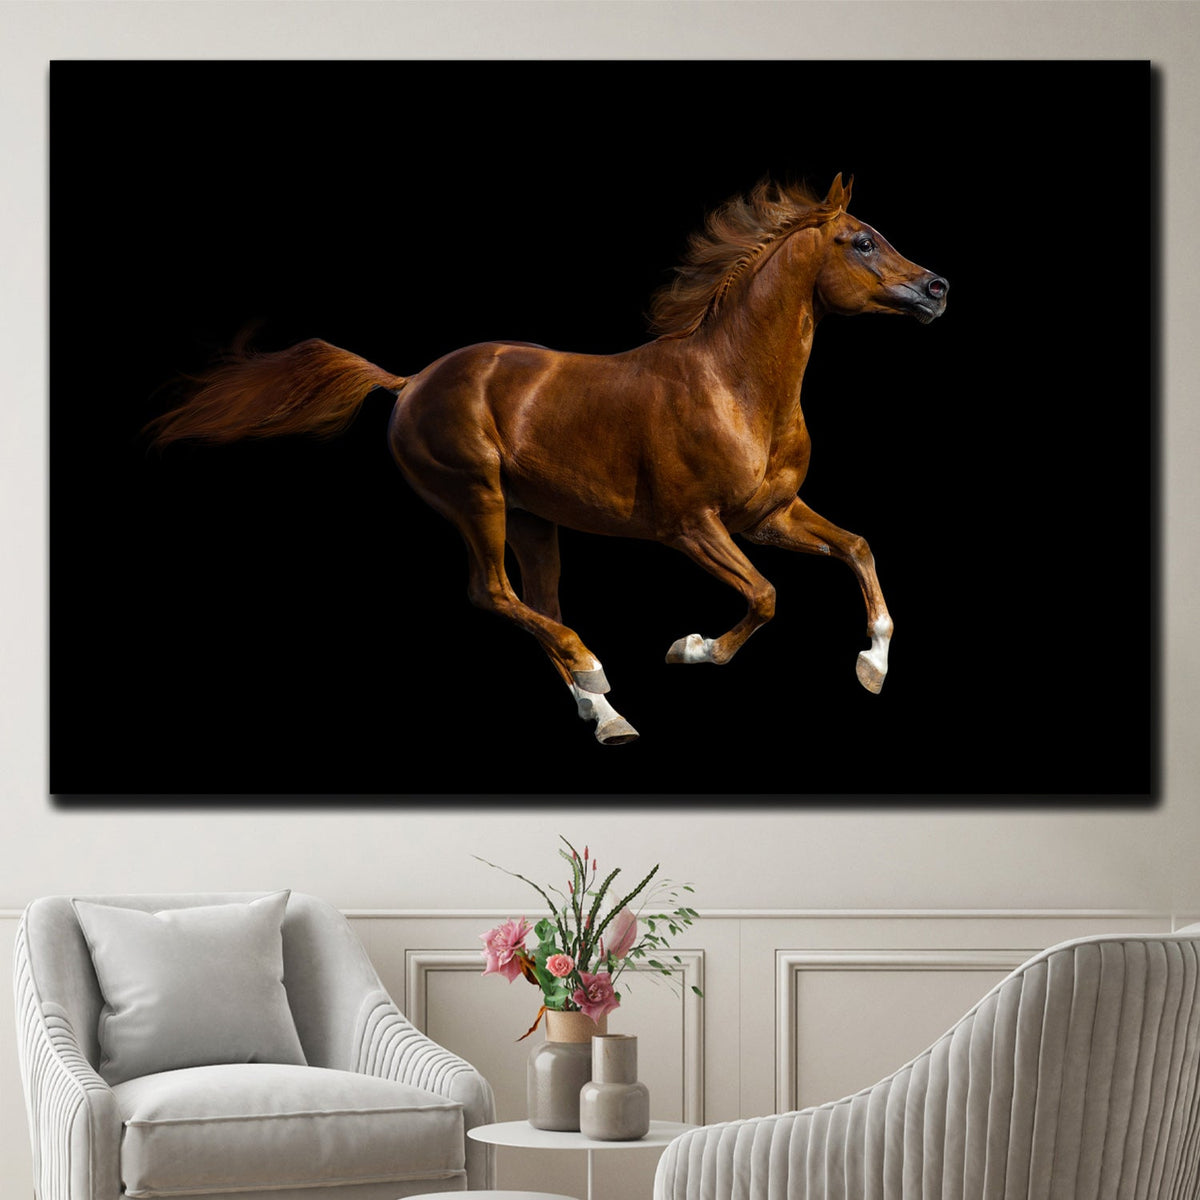 https://cdn.shopify.com/s/files/1/0387/9986/8044/products/ChestnutHorseCanvasArtprintStretched-3.jpg